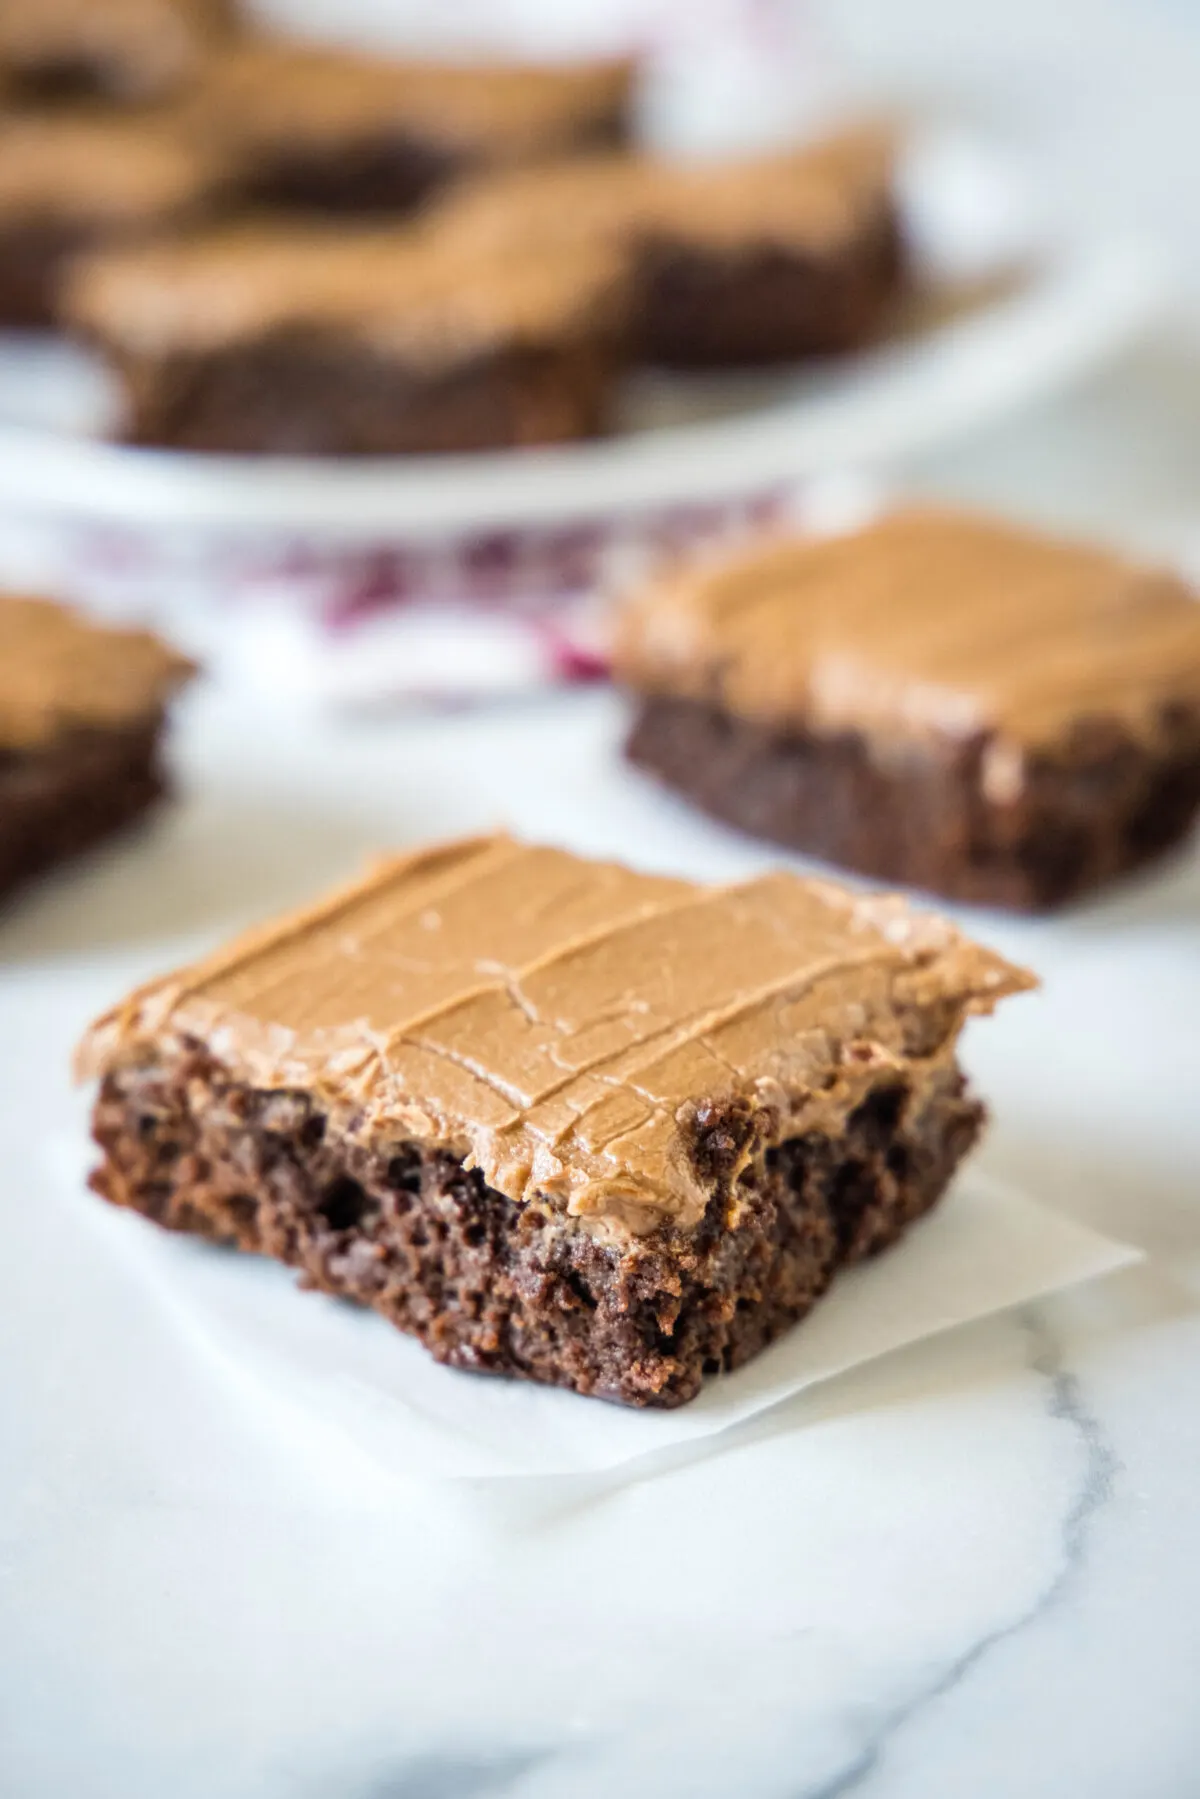 A brownie square with chocolate frosting, with a plate of brownies in the background.